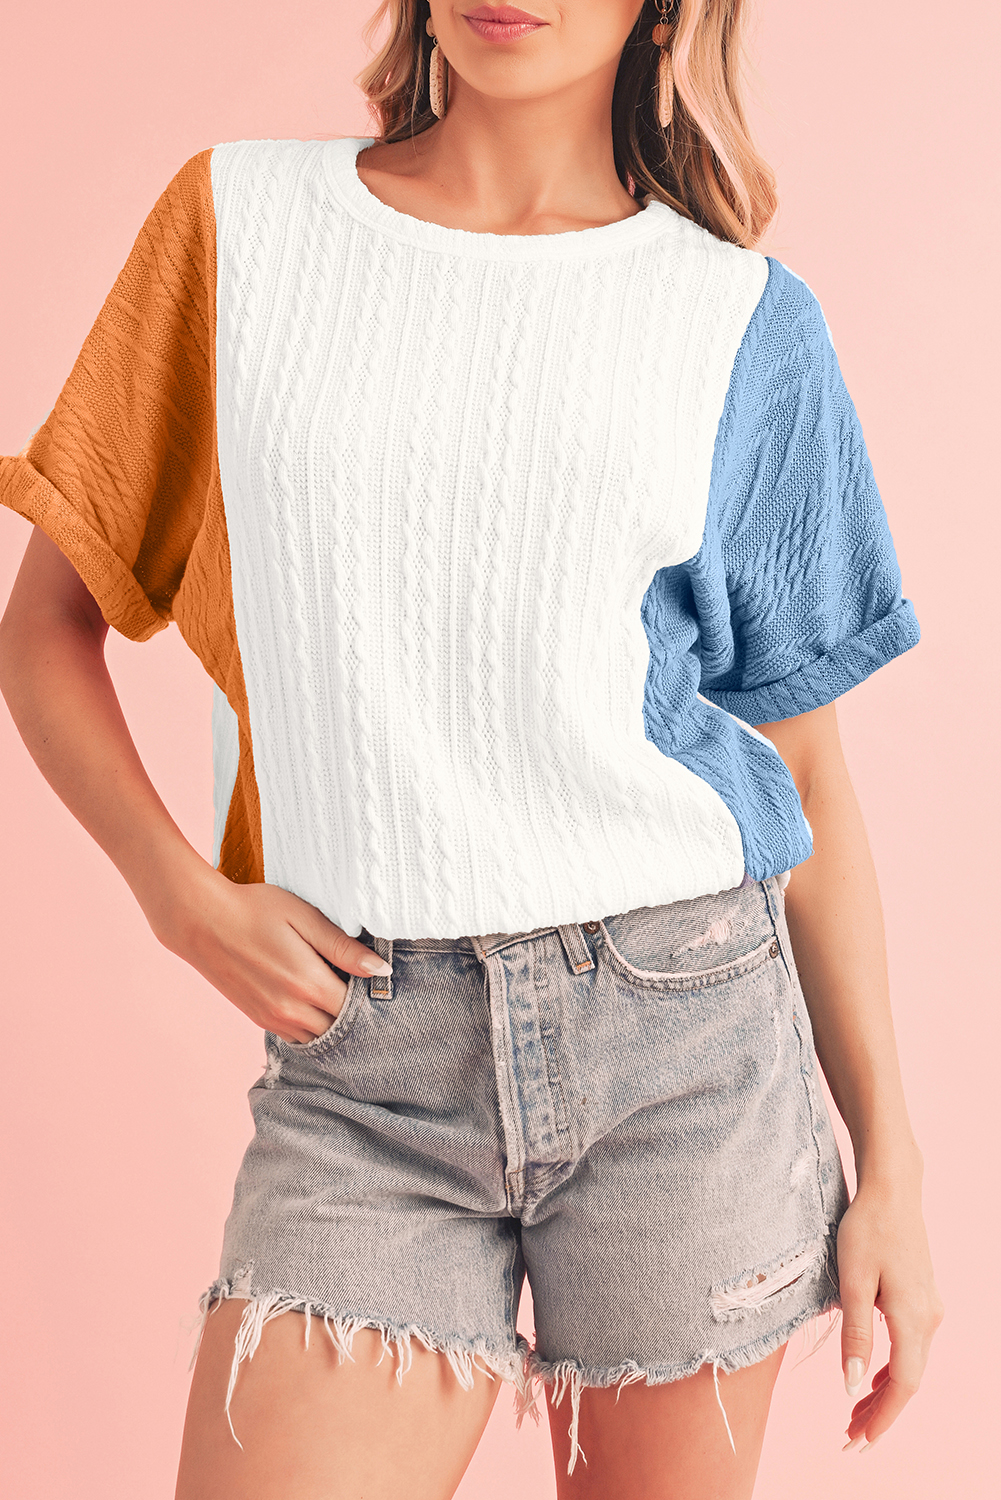 Shewin Wholesale NEW arrival Light Blue Color Block Textured Loose Fit T Shirt